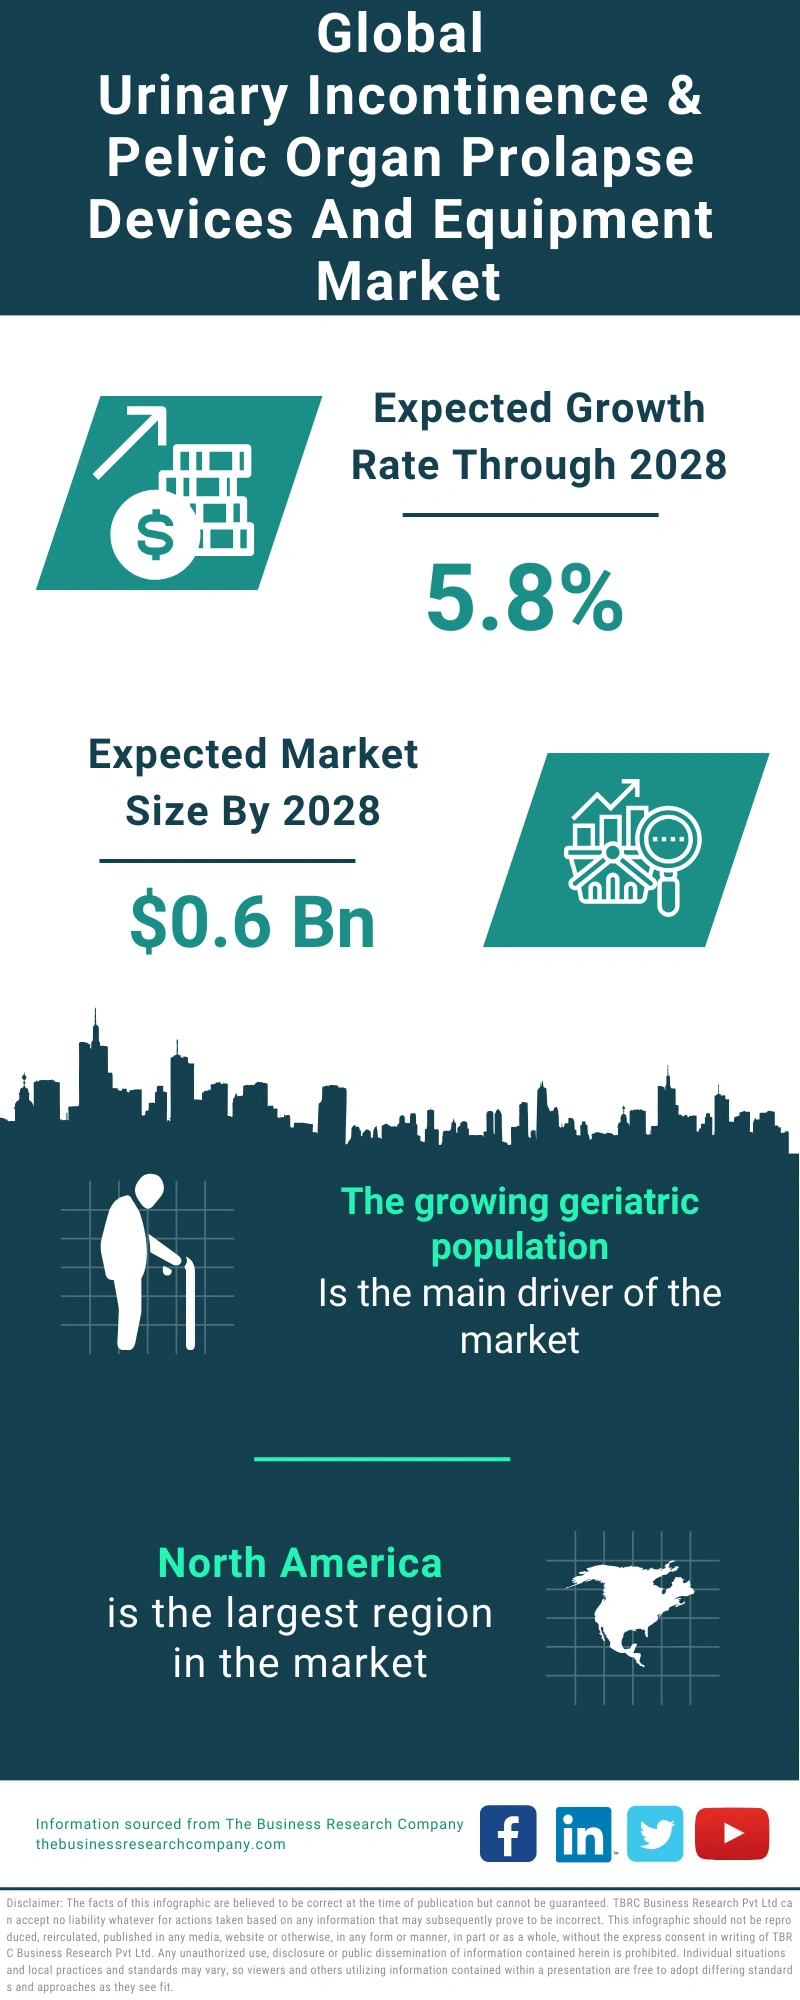 Urinary Incontinence & Pelvic Organ Prolapse Devices And Equipment Global Market Report 2024